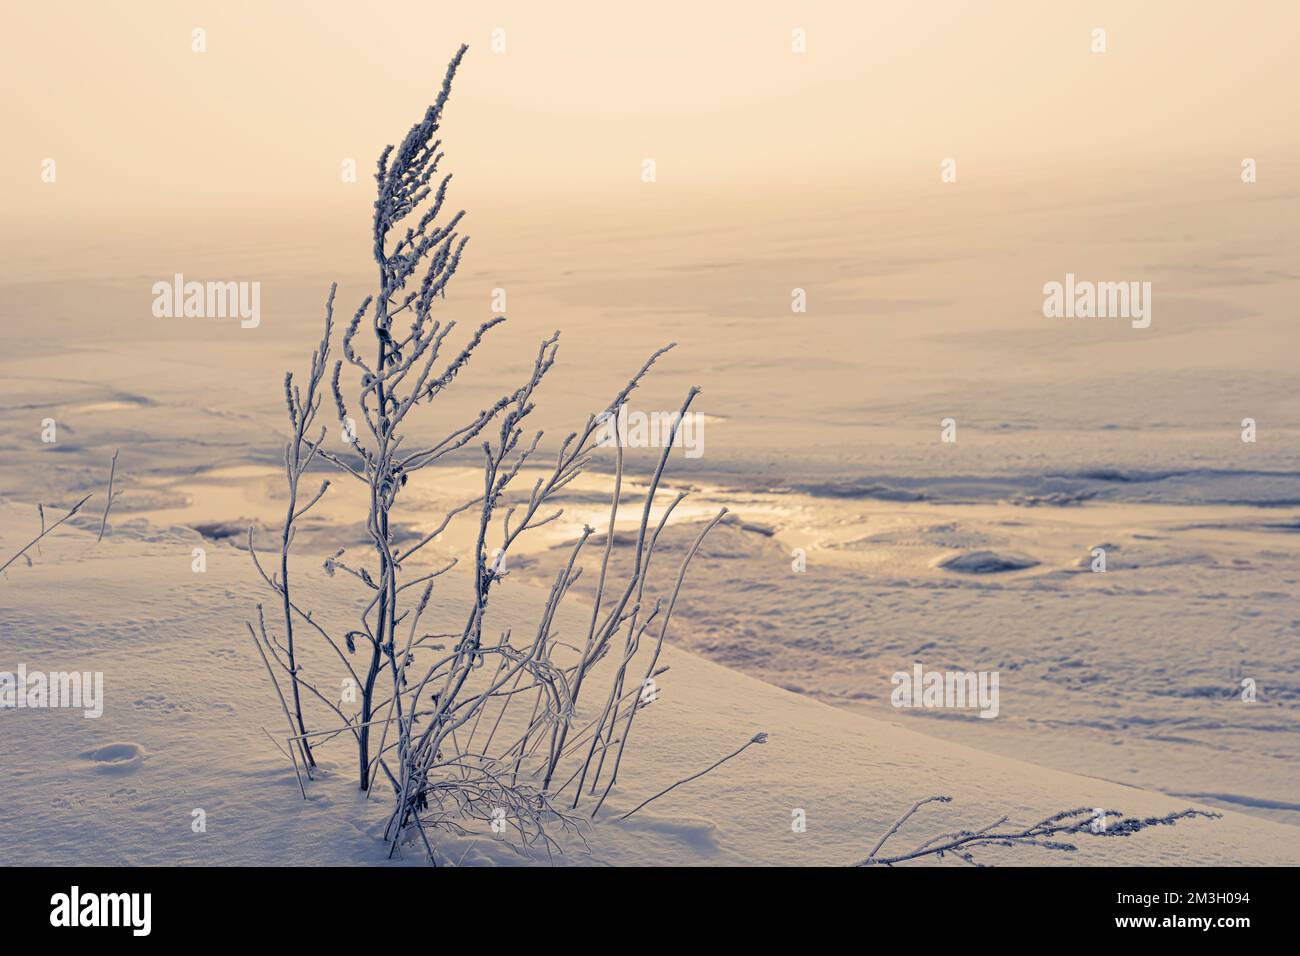 Weeds and grasses poking through the snow over a frozen field of ice. Stock Photo